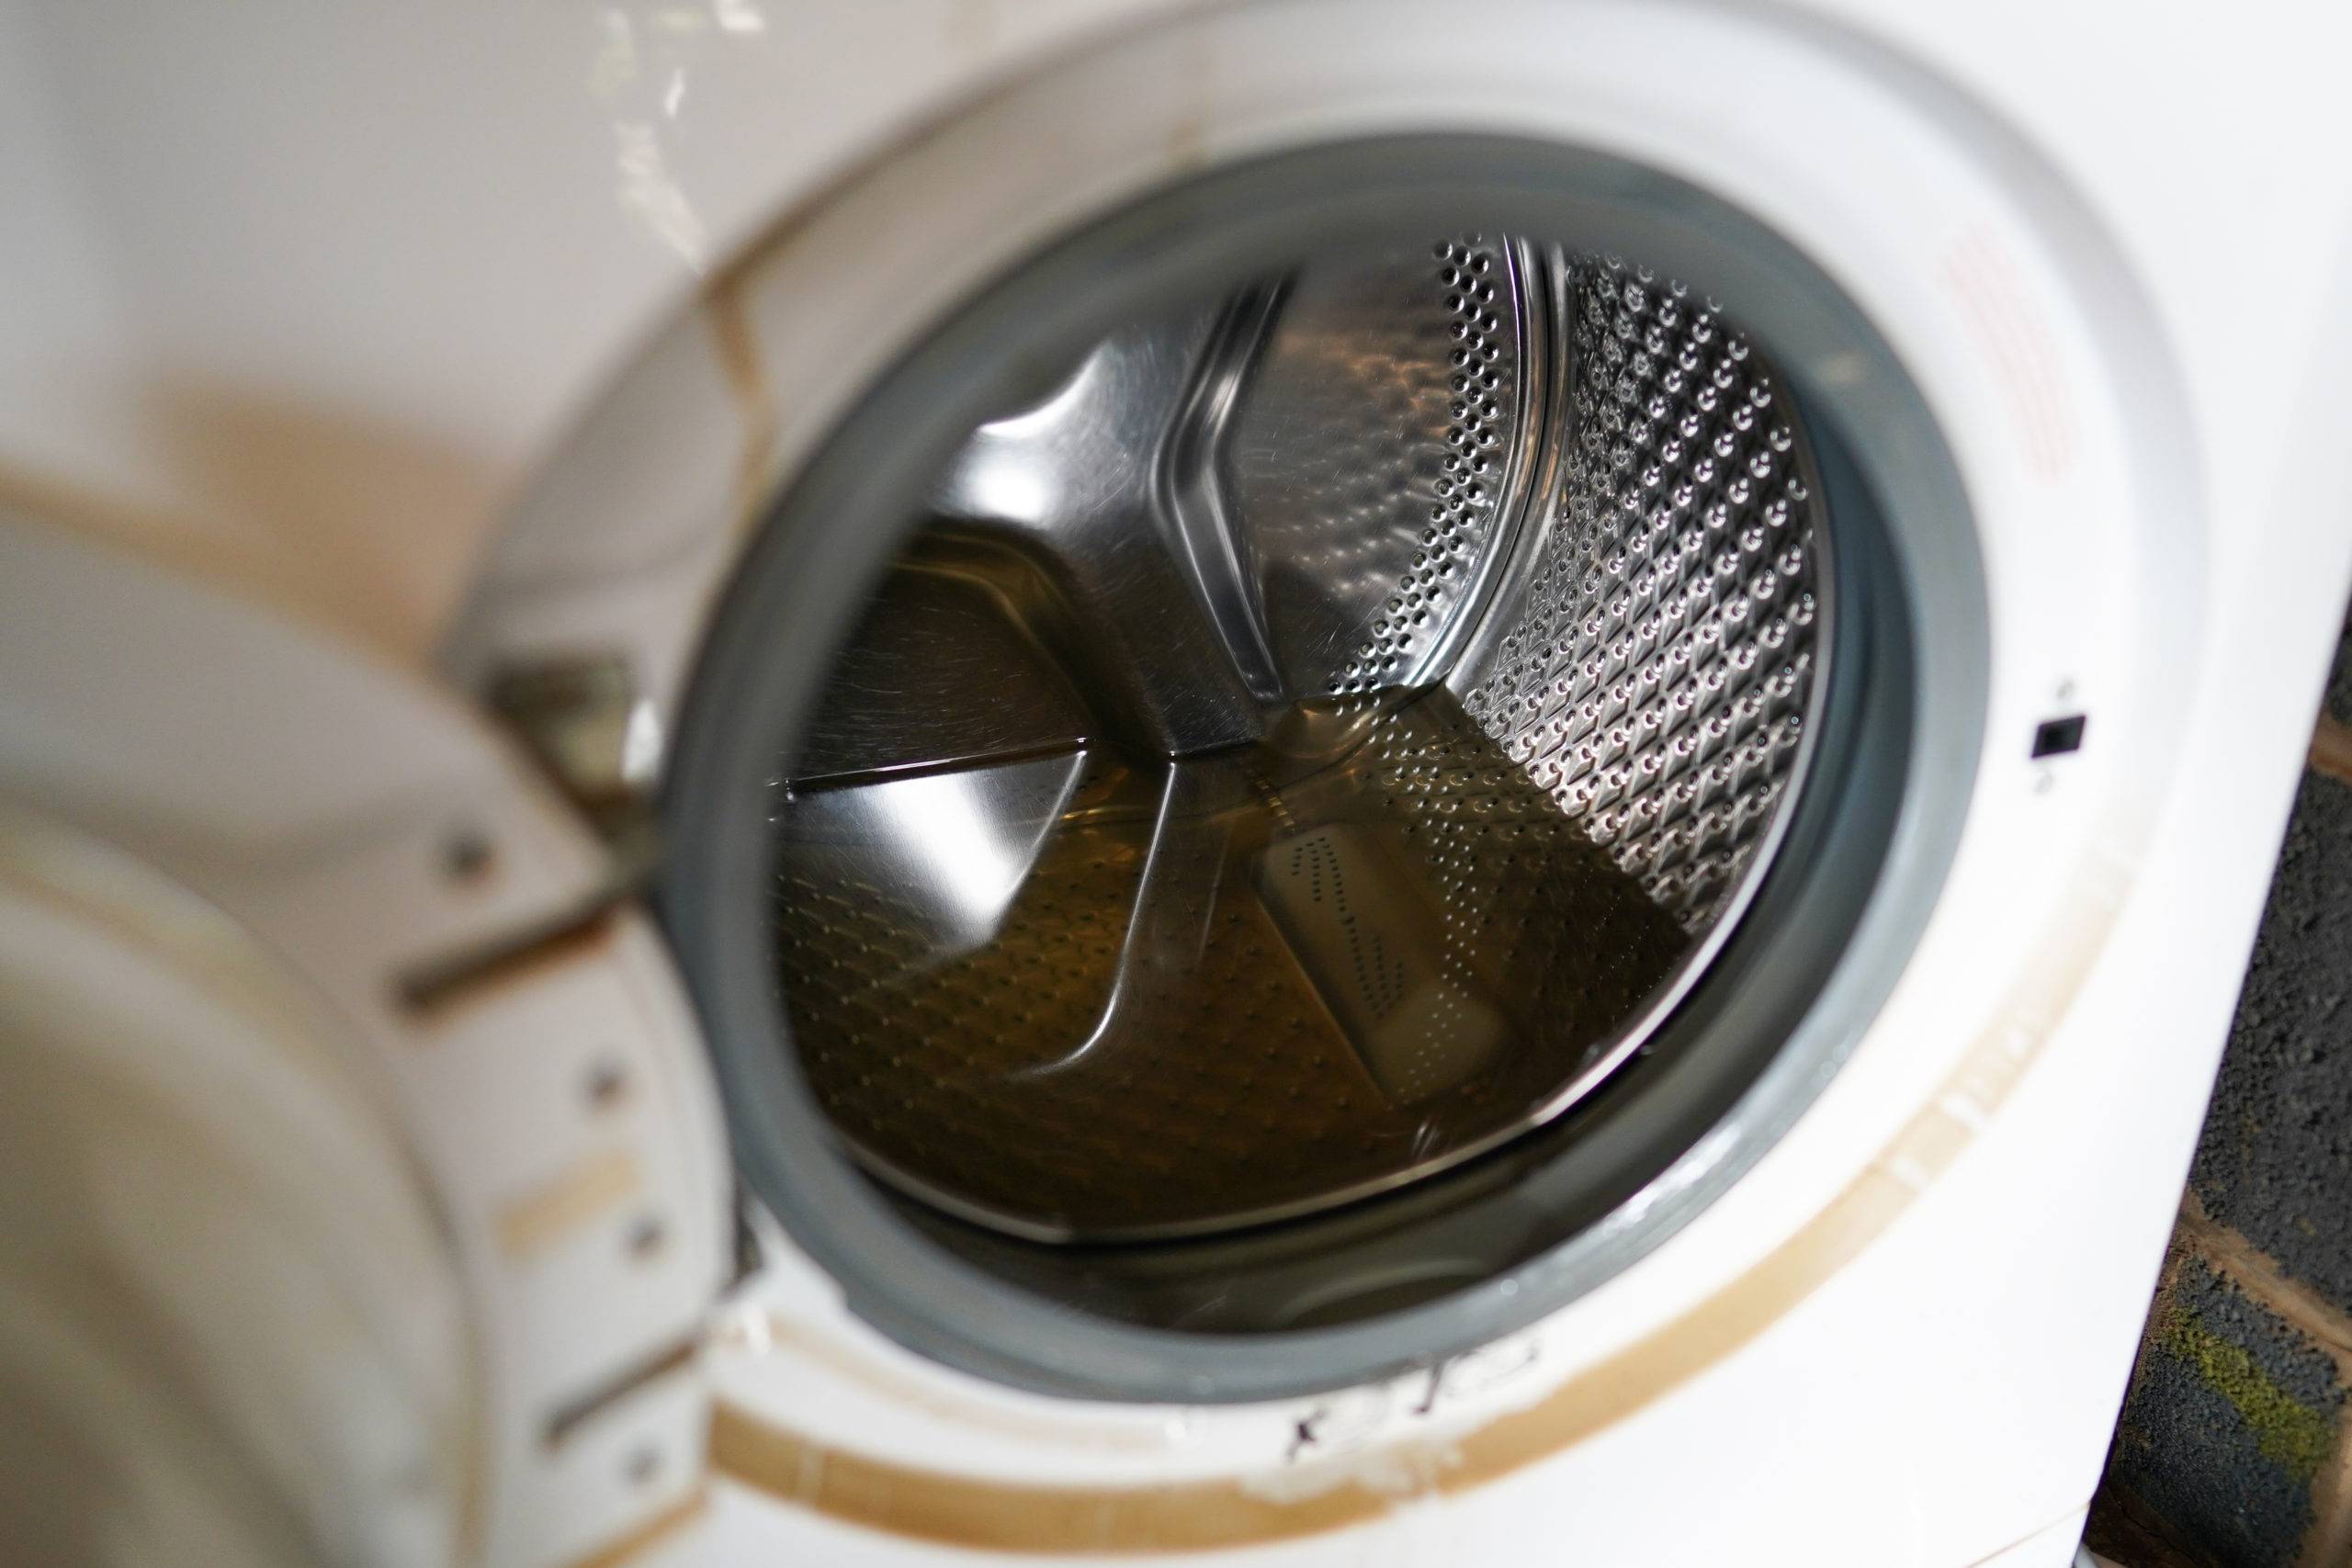 How To Manually Drain Washer How To Drain a Washing Machine (Front & Top-Loading) - ManMadeDIY